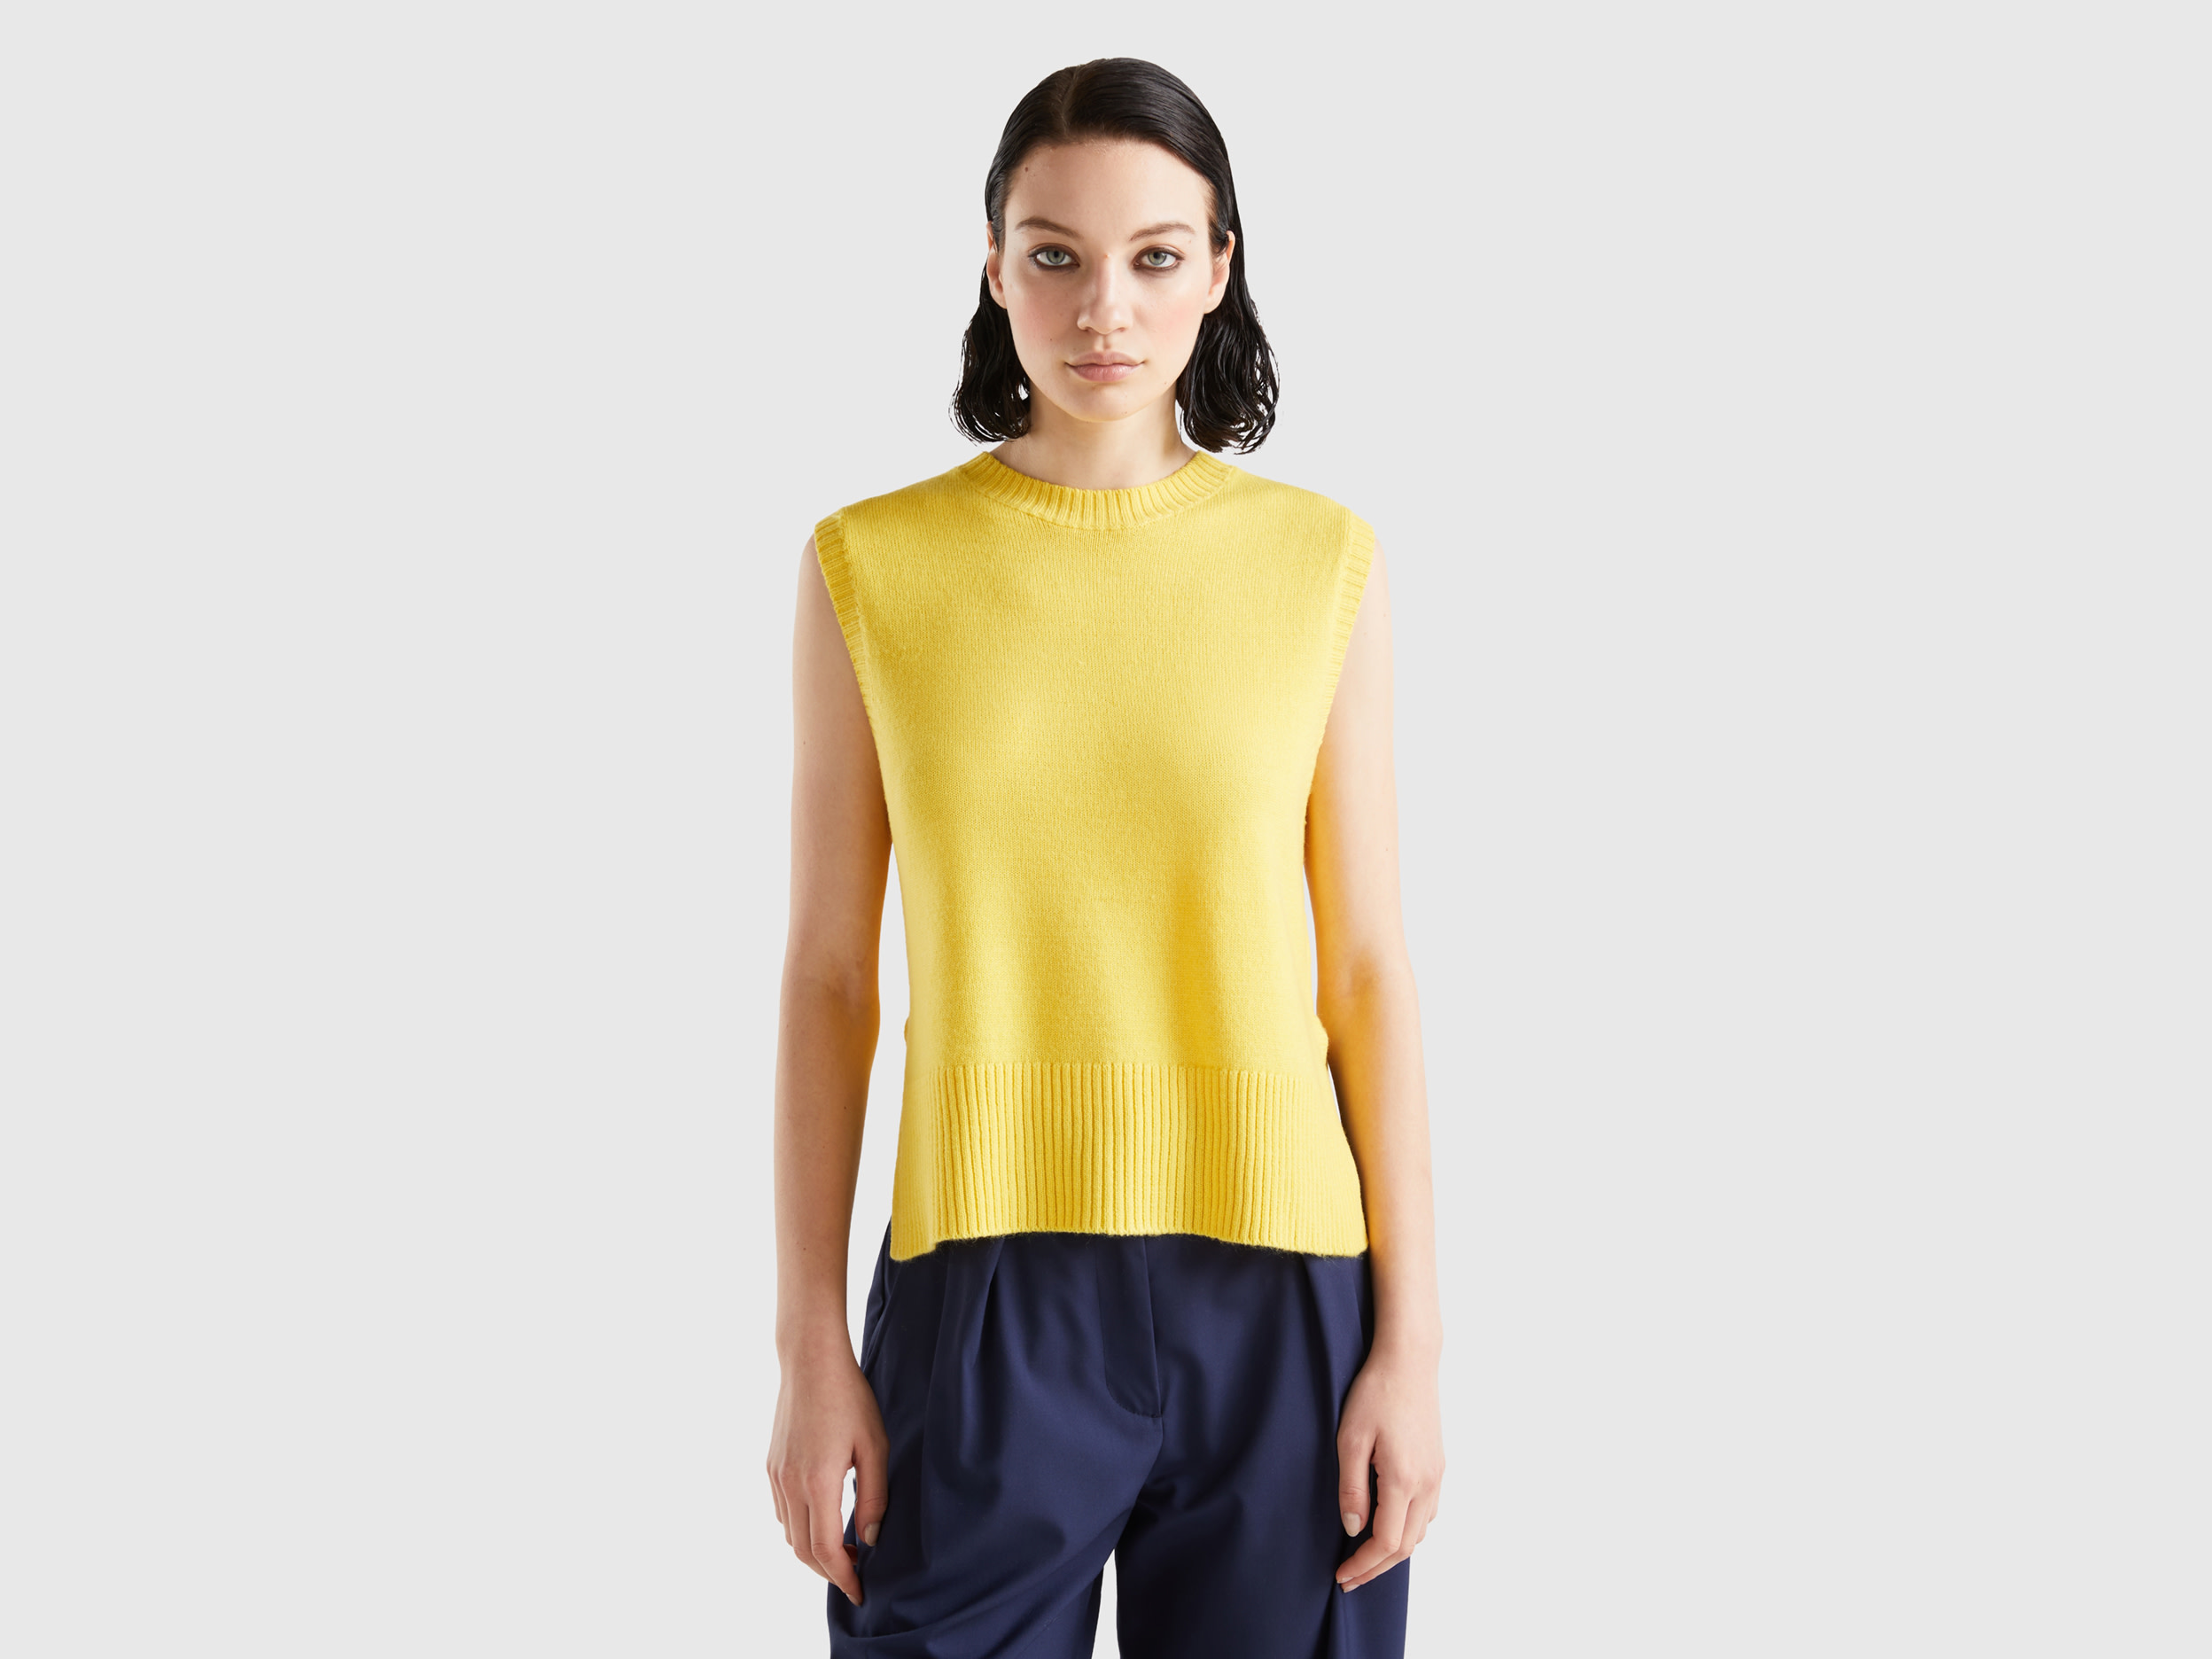 Benetton, Knit Vest With Slits, size XS, Yellow, Women